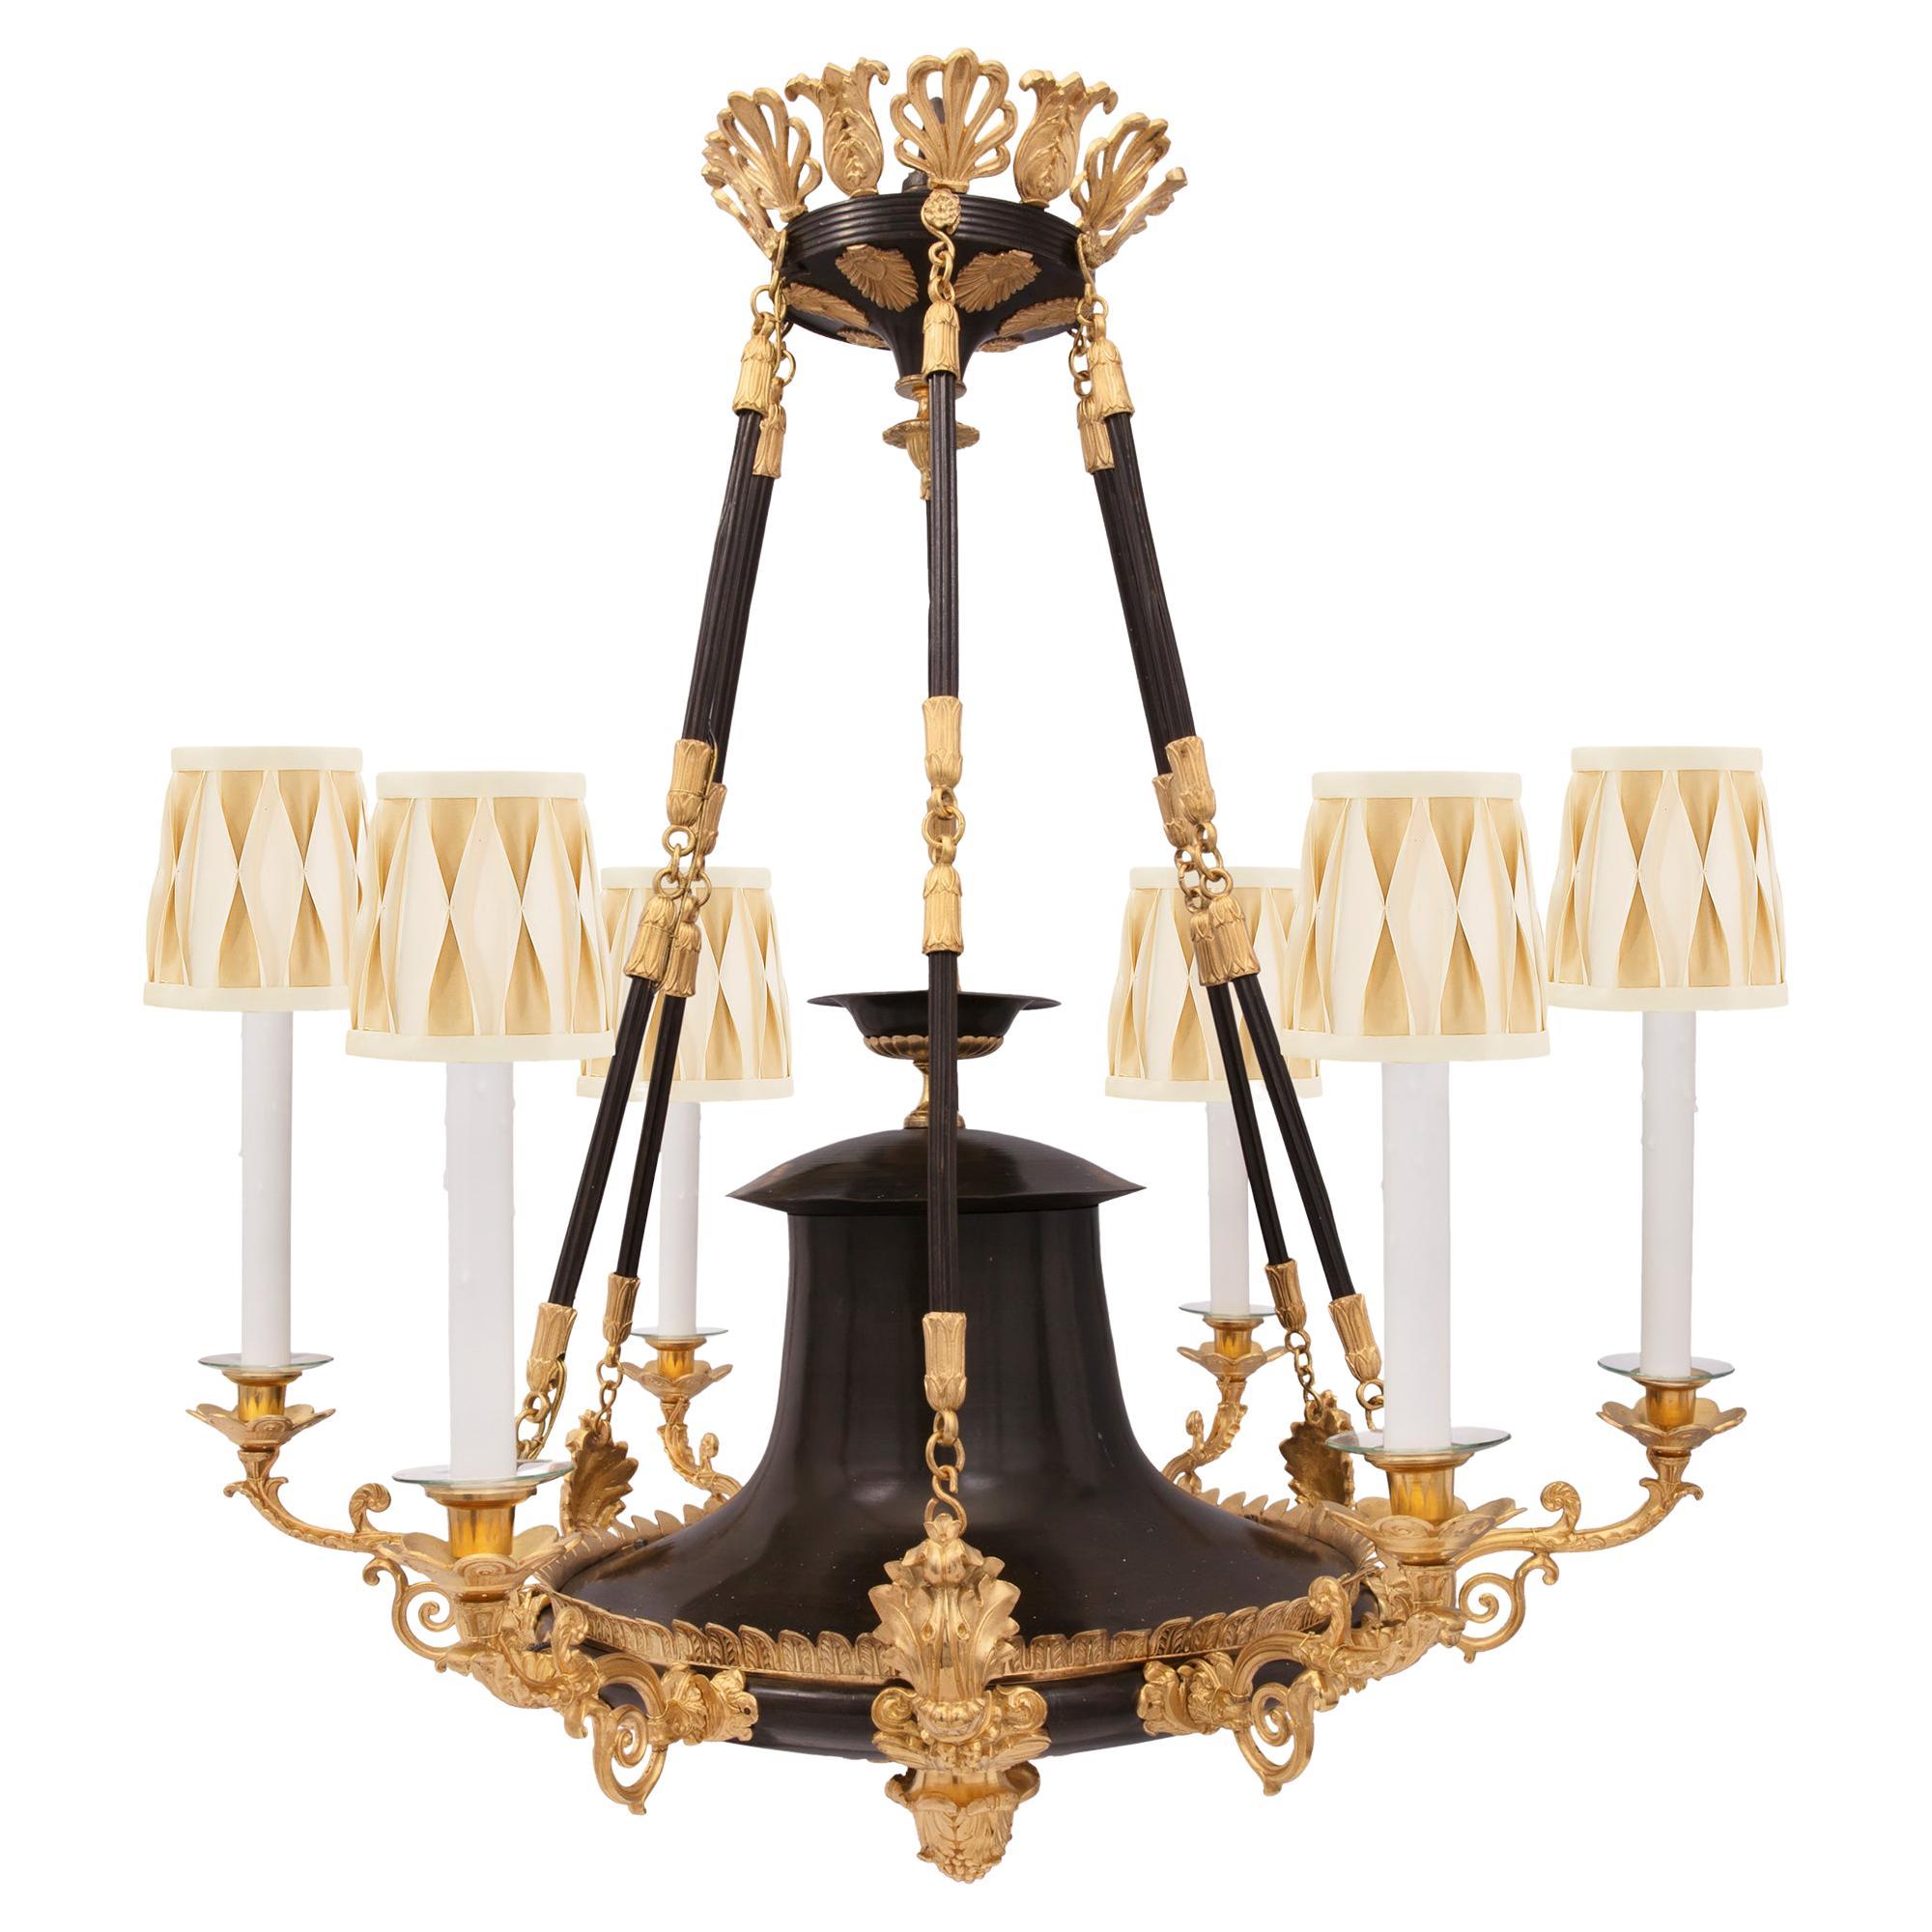 French 19th Century Neoclassical Style Patinated Bronze and Ormolu Chandelier For Sale